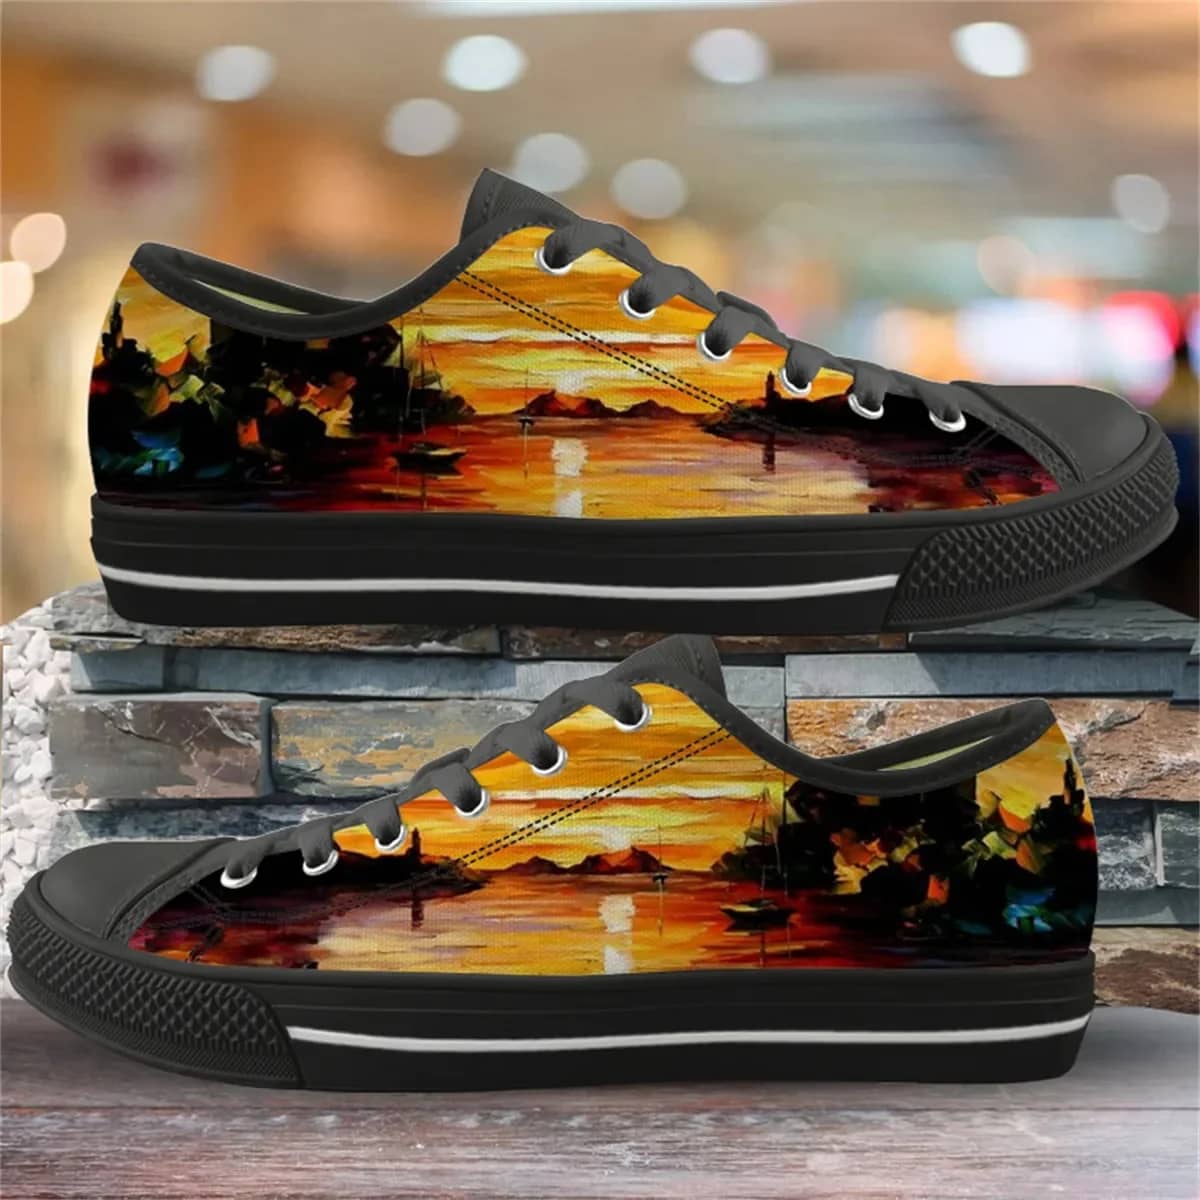 Oil Painting Landscape Printing Style 3 Custom Amazon Low Top Shoes